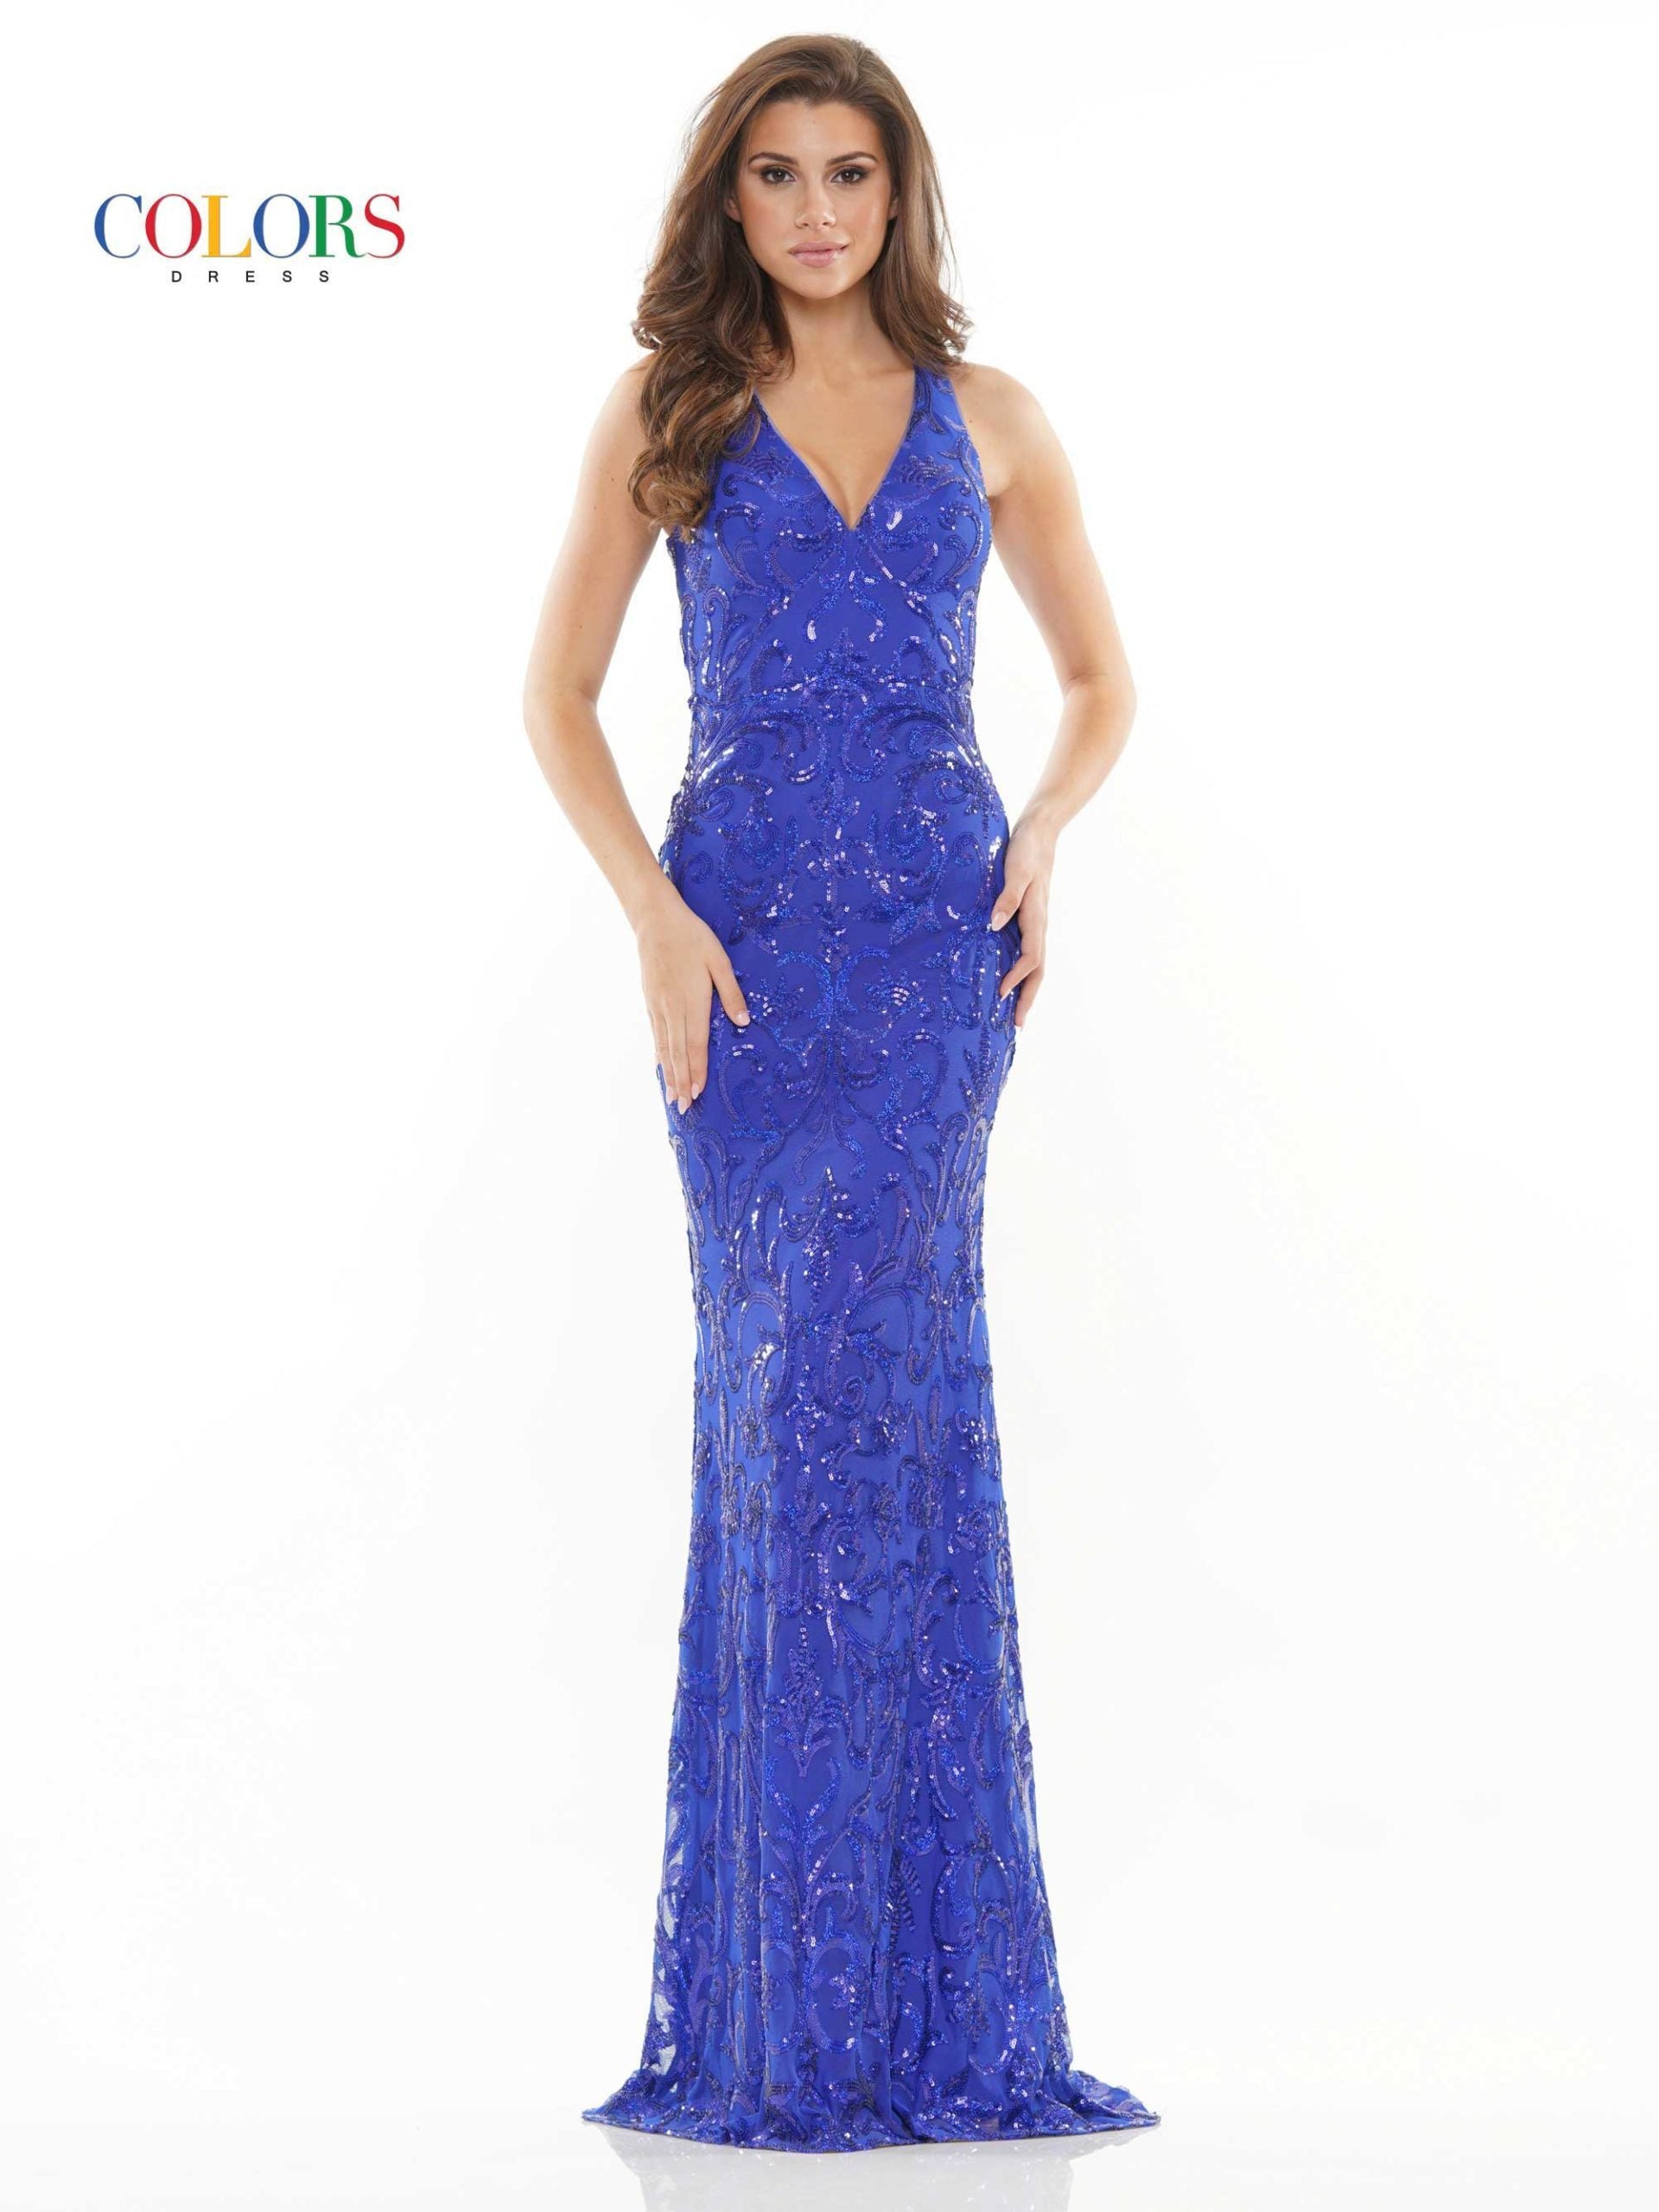 Colors 2520 Long Fitted Sequin Prom Dress Open Back Pageant Gown V Neckline 47″ Patterned sequin jersey dress with V neck, fitted skirt and cross back detail  Available Sizes: 2-24  Available Colors: Wine, Royal, Off White, Black